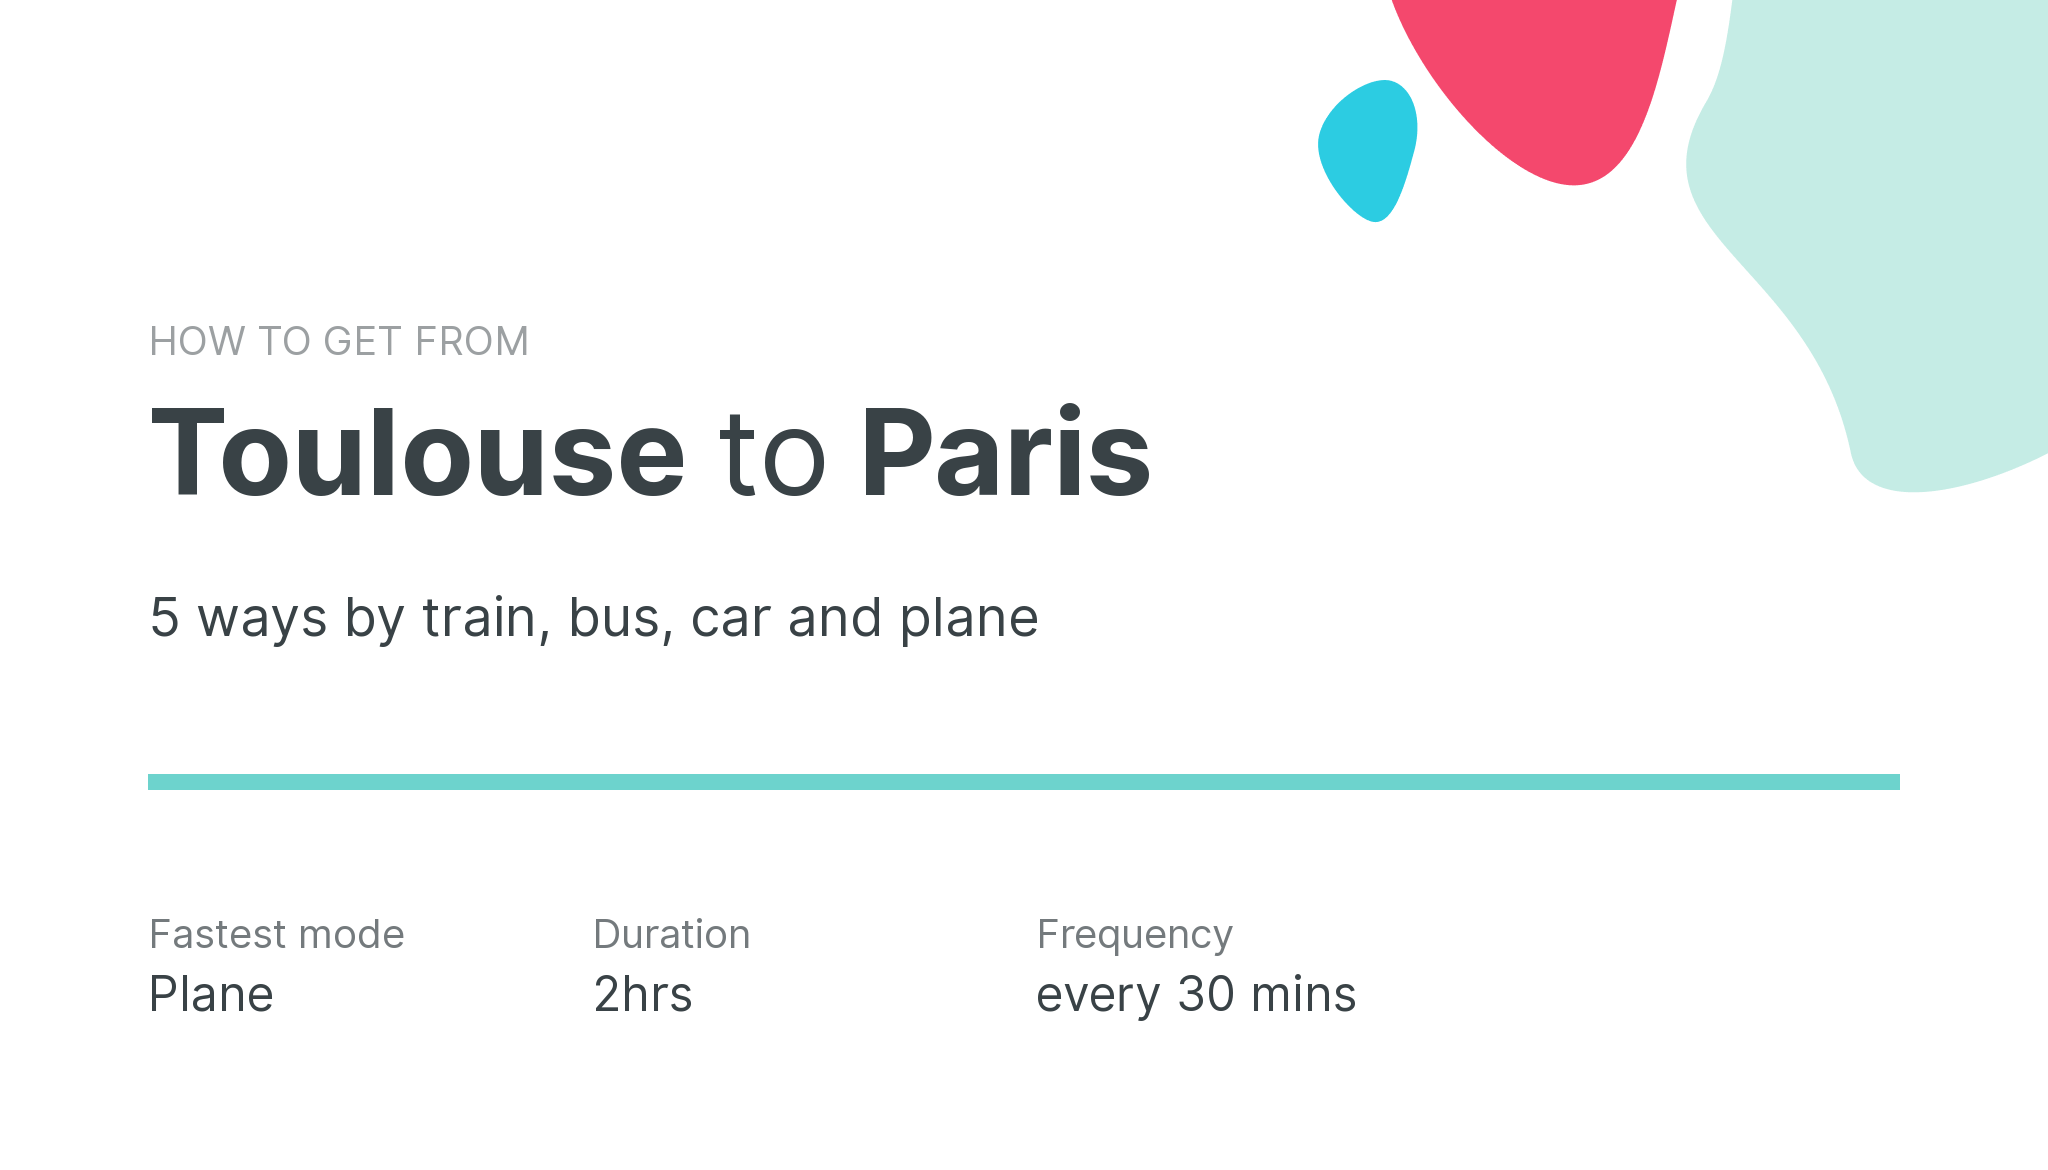 How do I get from Toulouse to Paris